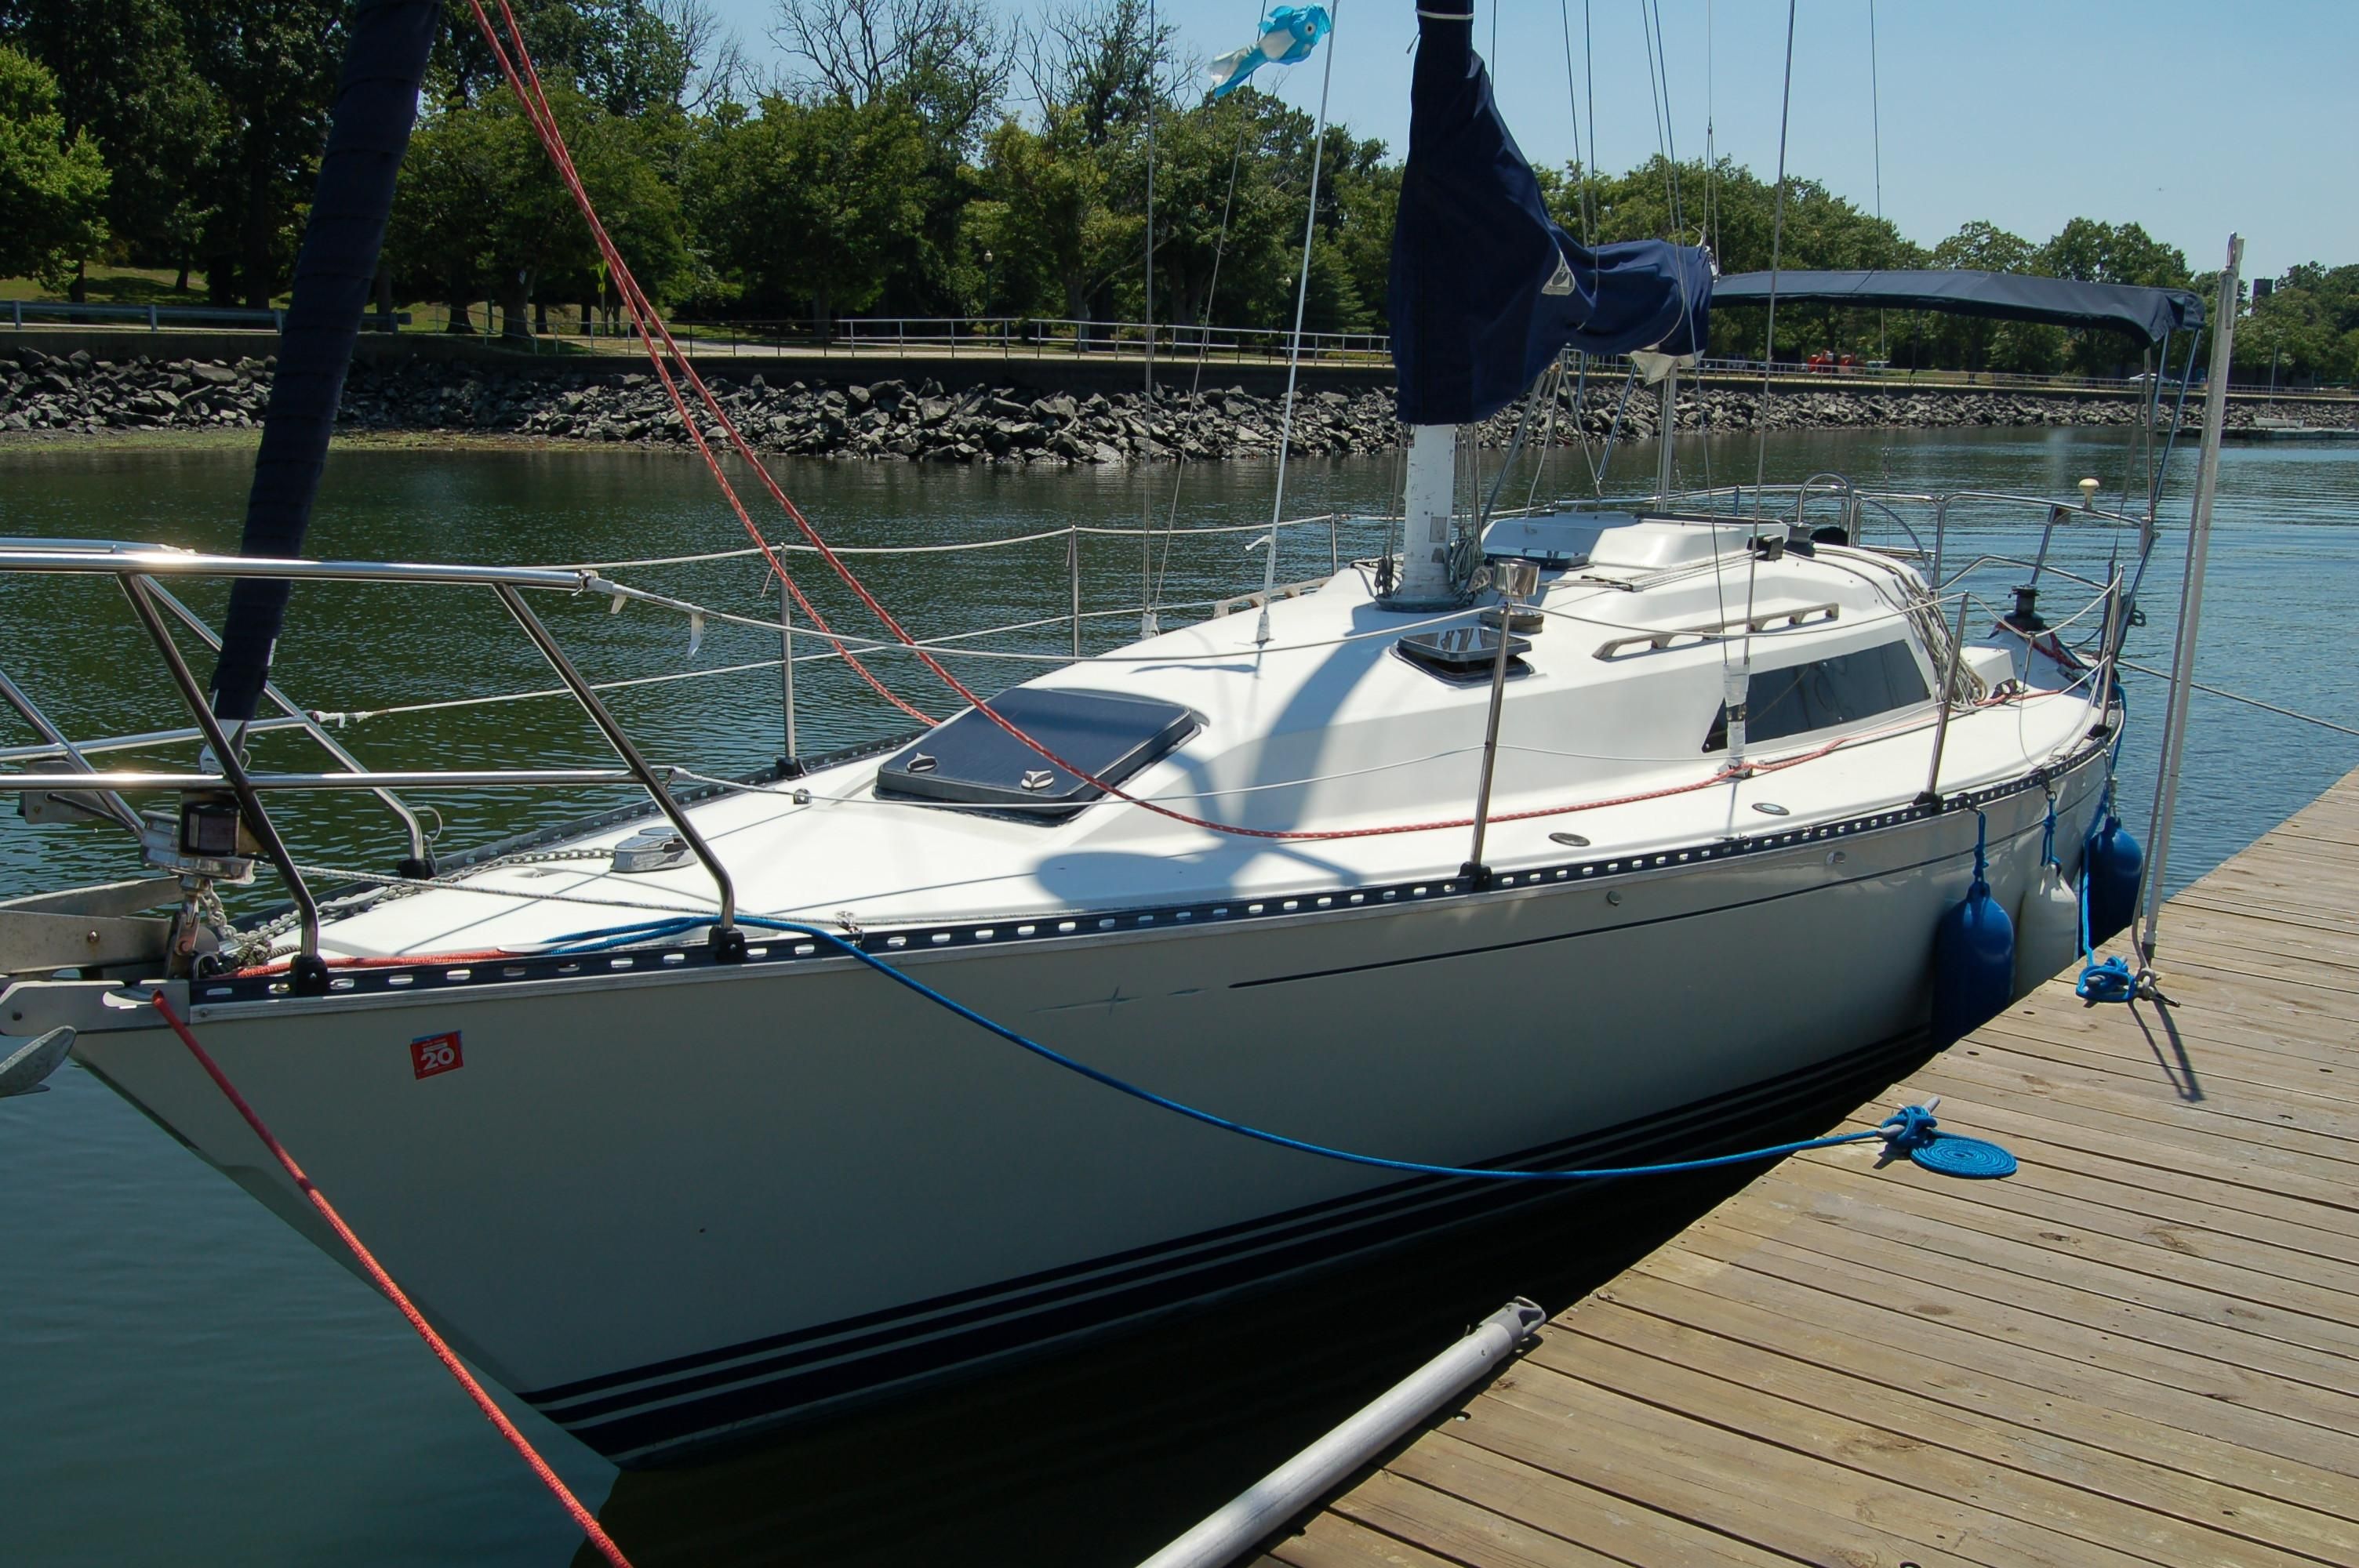 33' sailboat for sale